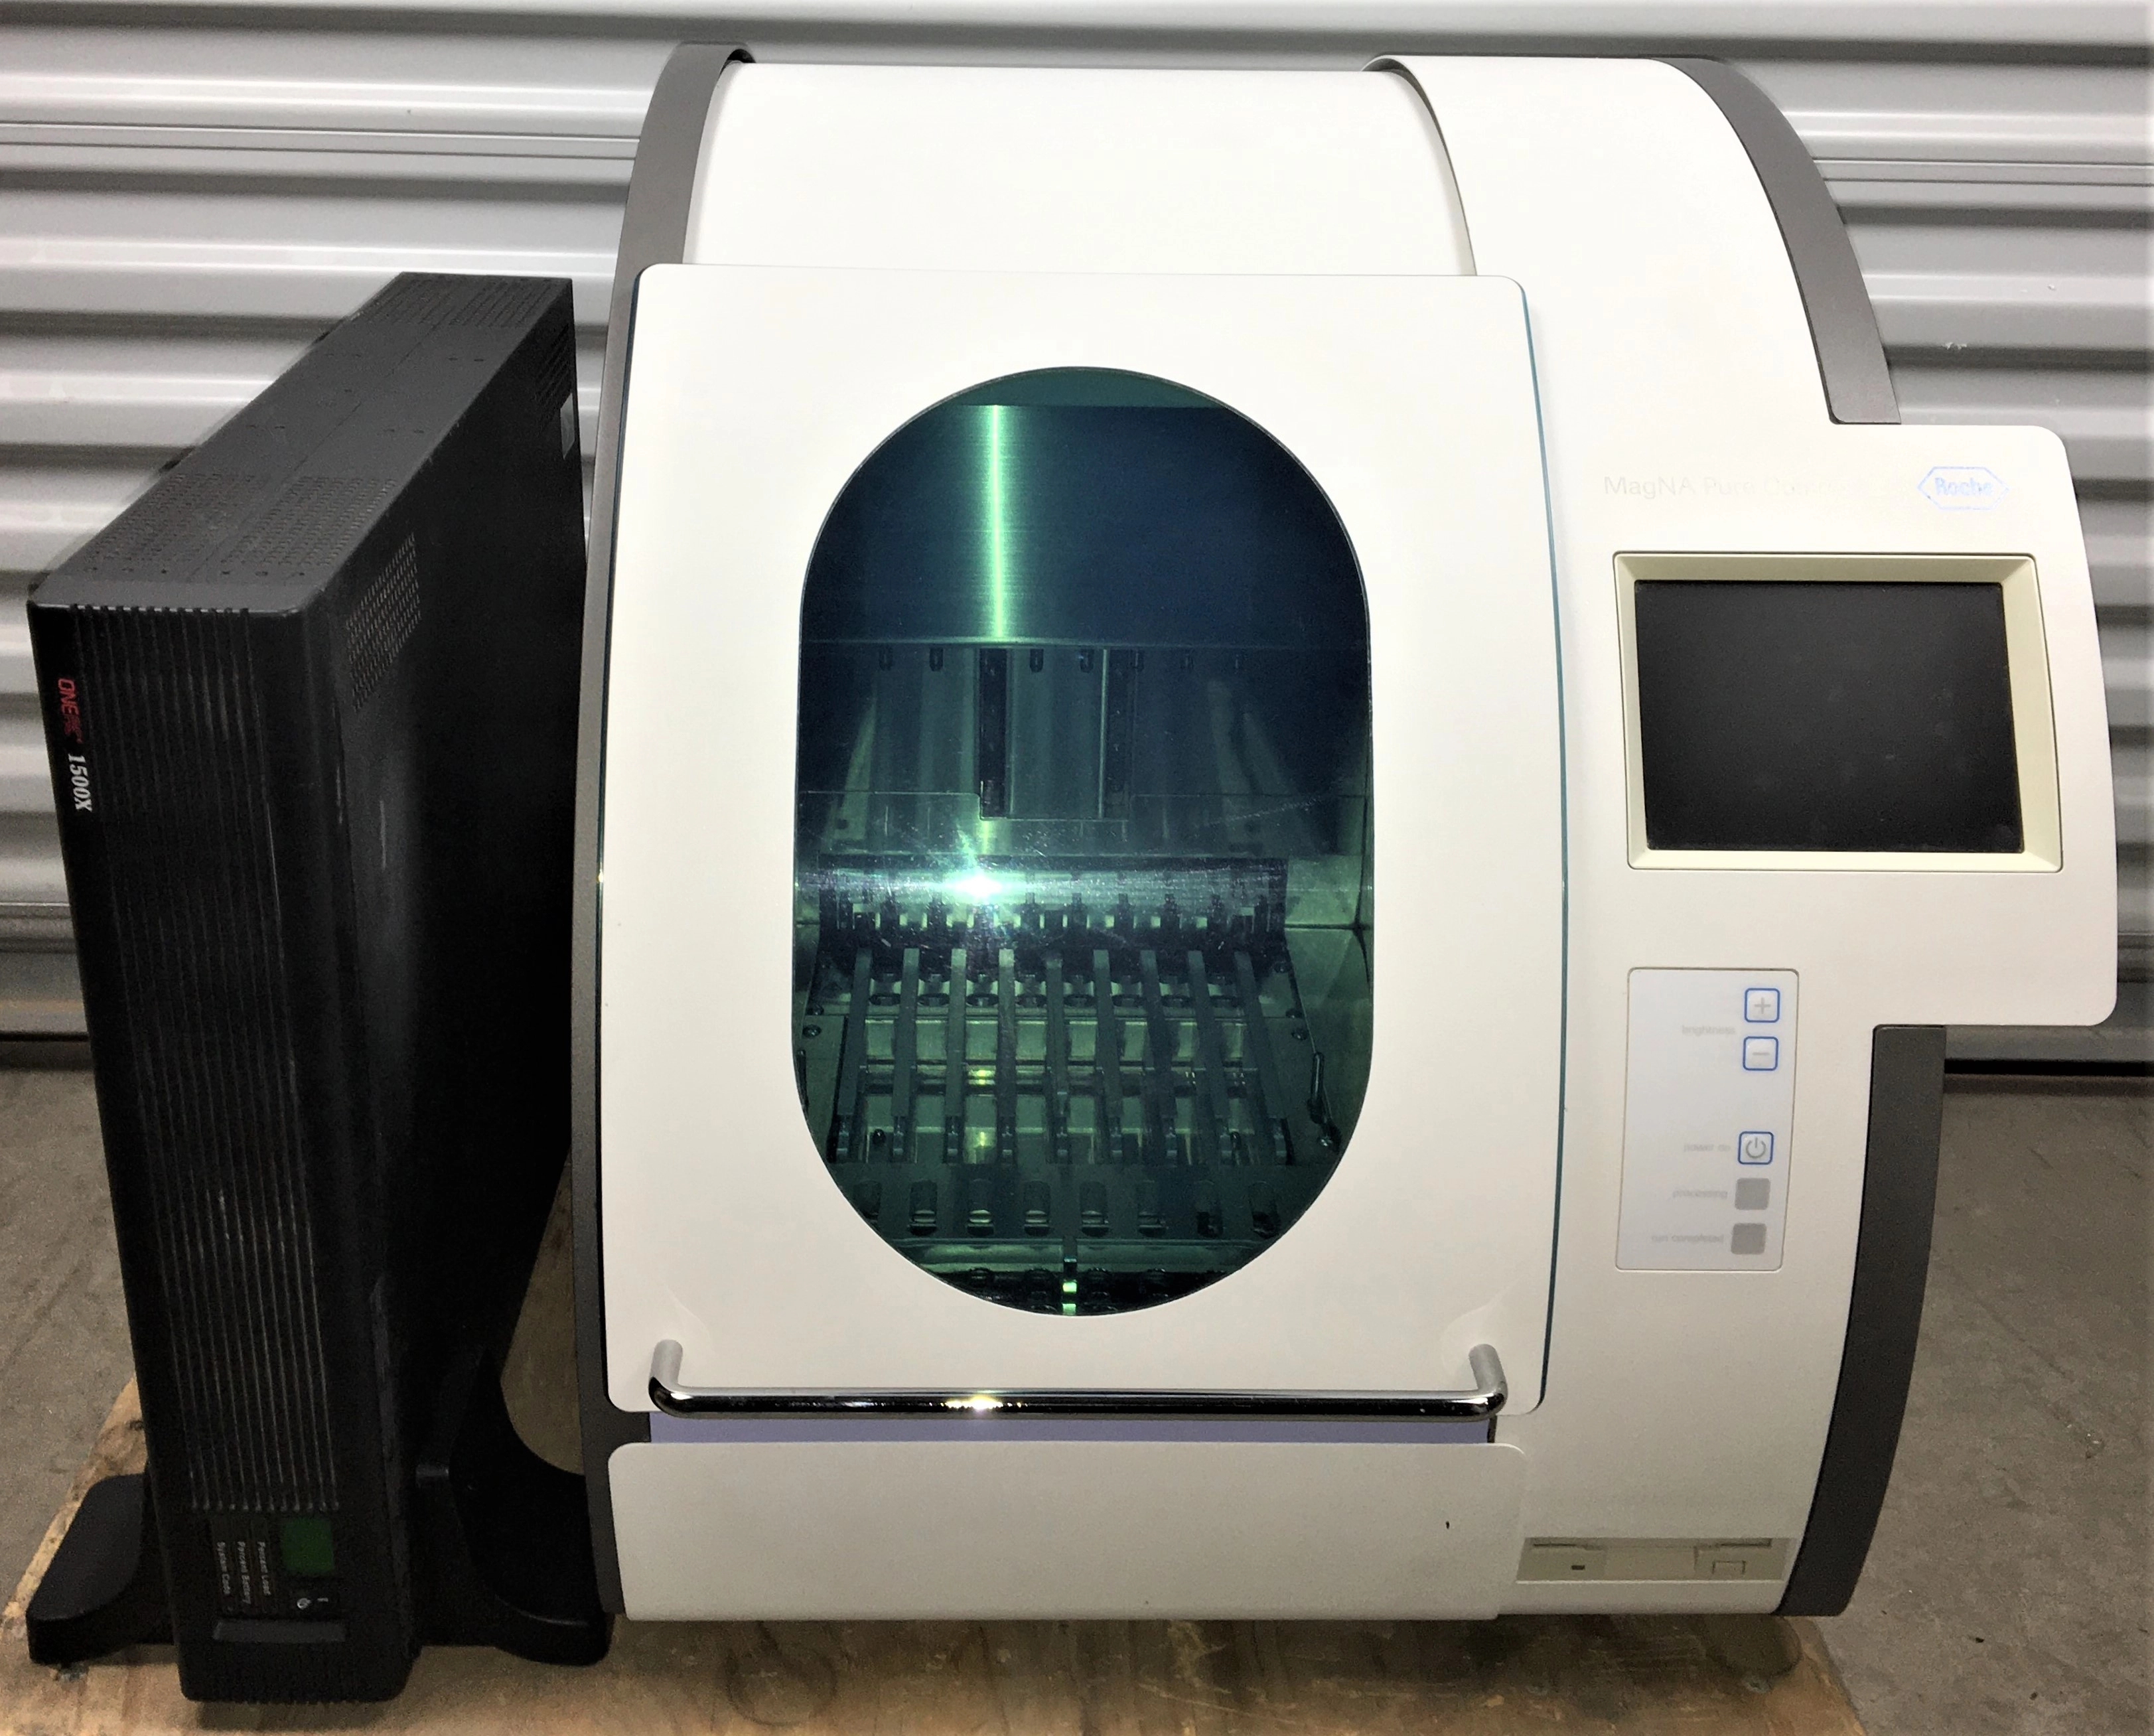 Roche MagNA Pure Compact Nucleic Acid Isolation System